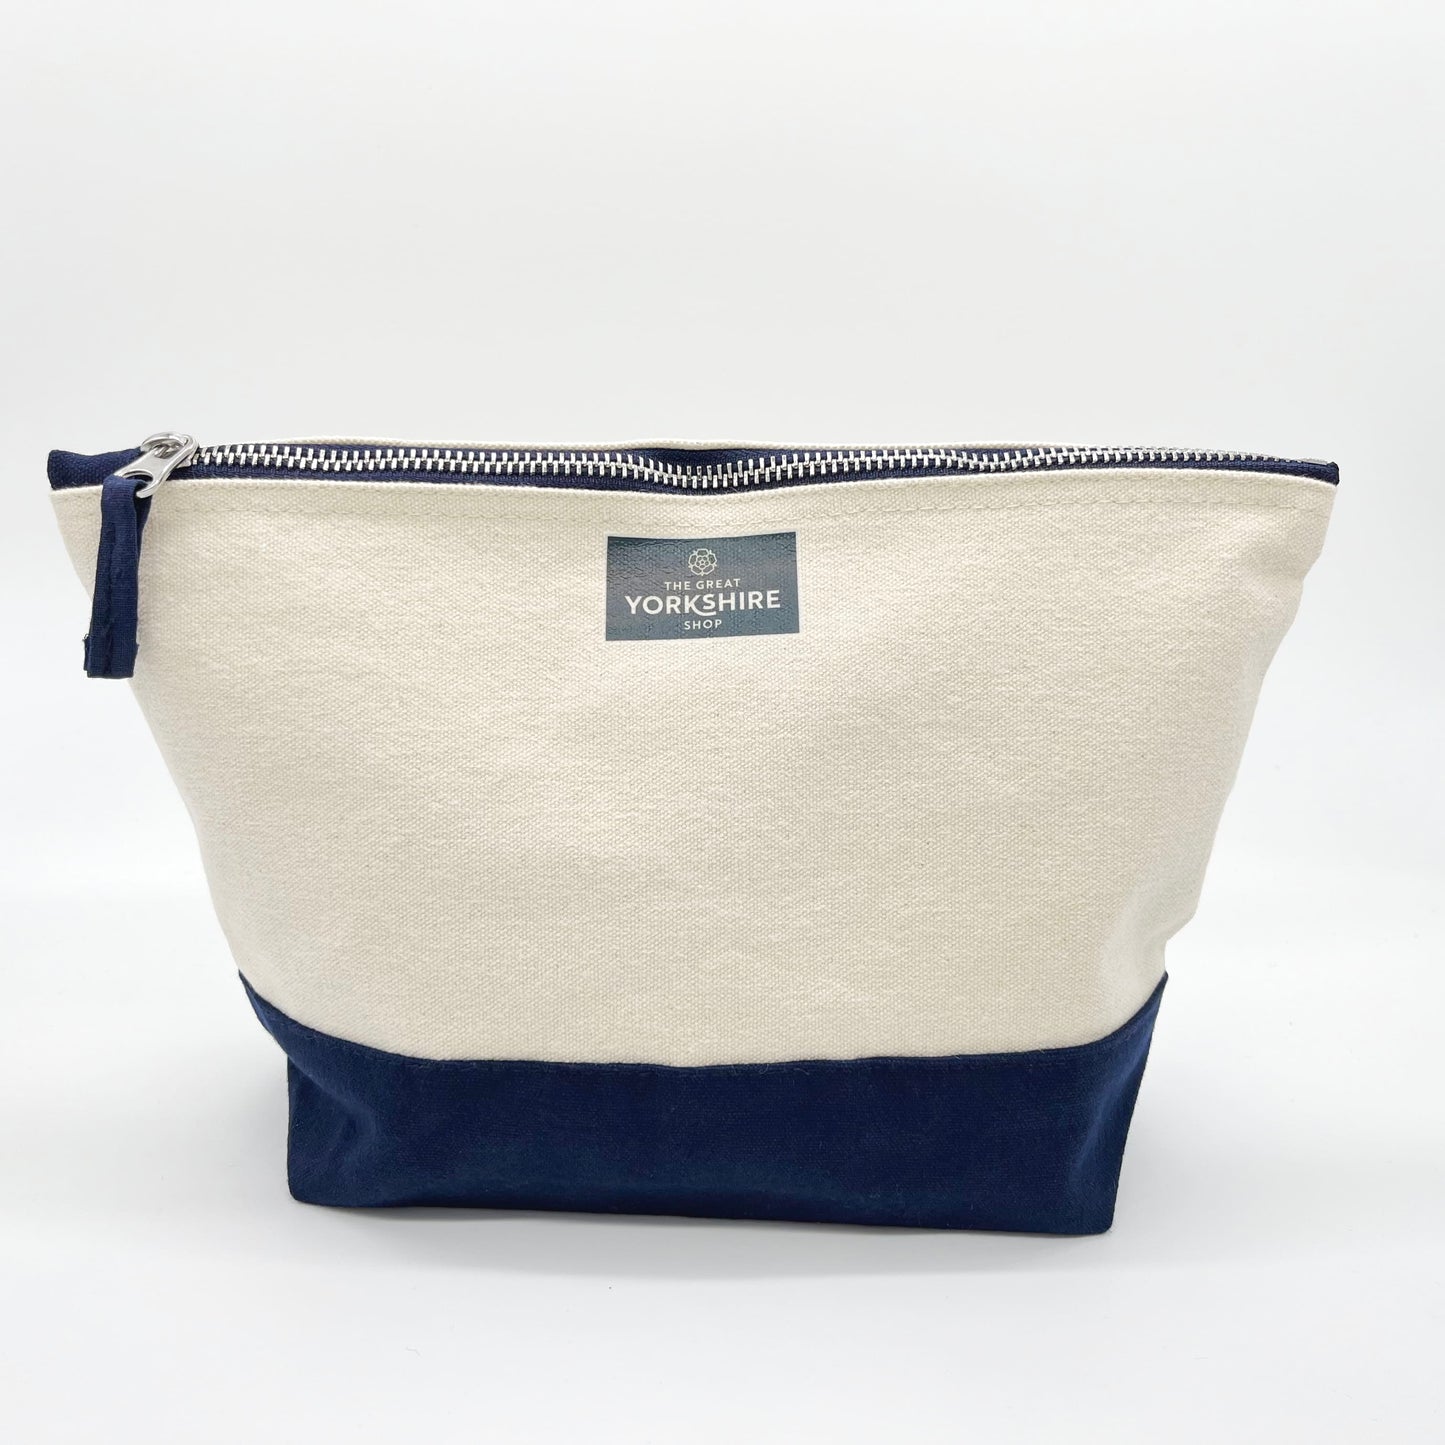 The Great Yorkshire Shop Unisex Toiletry Washbag - The Great Yorkshire Shop